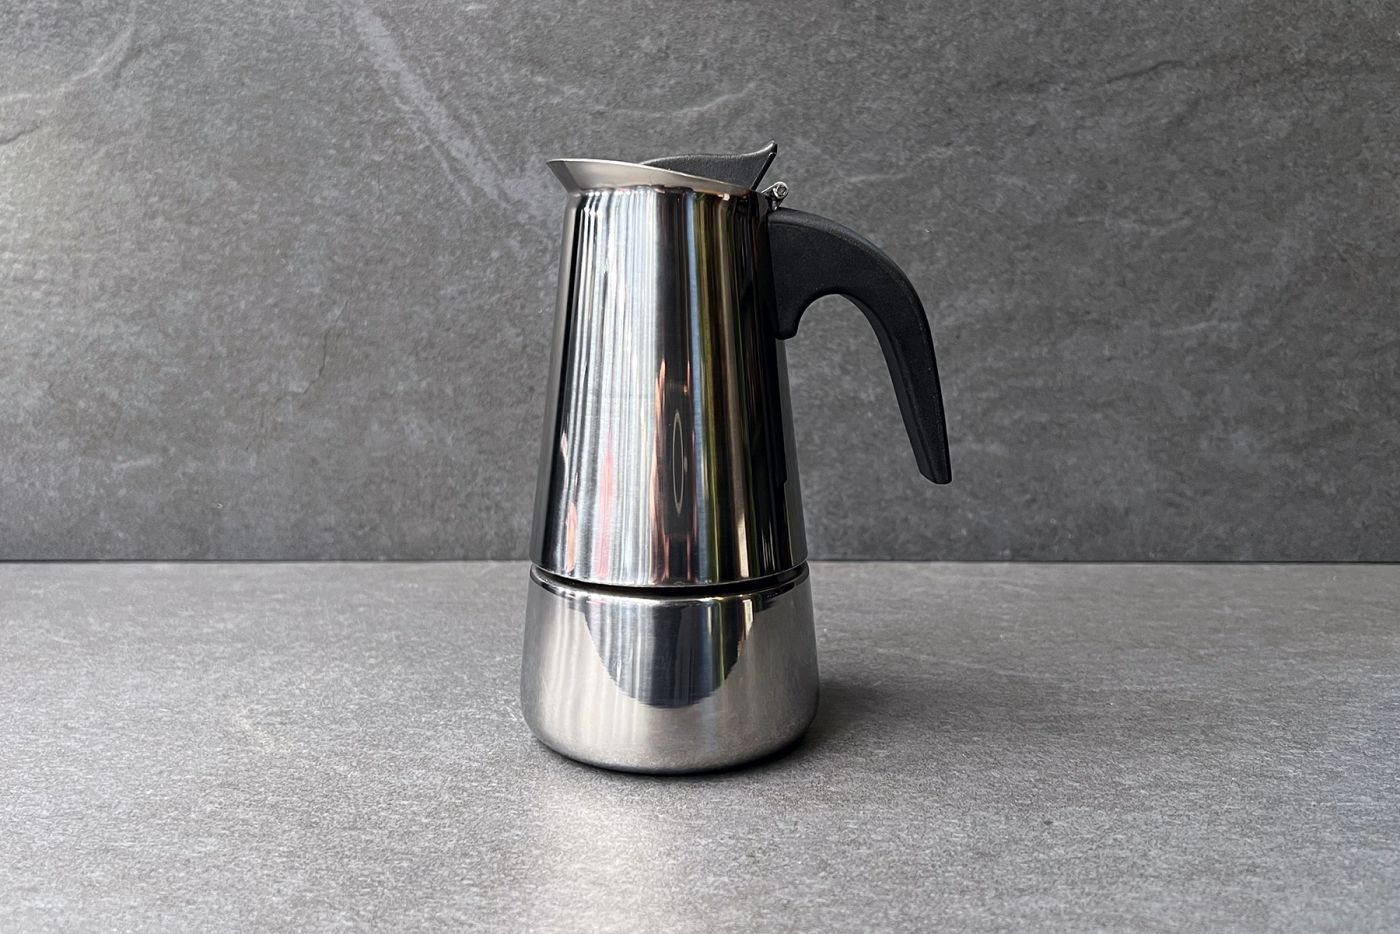 Moka Stainless Steel Espresso Maker 4-Cup